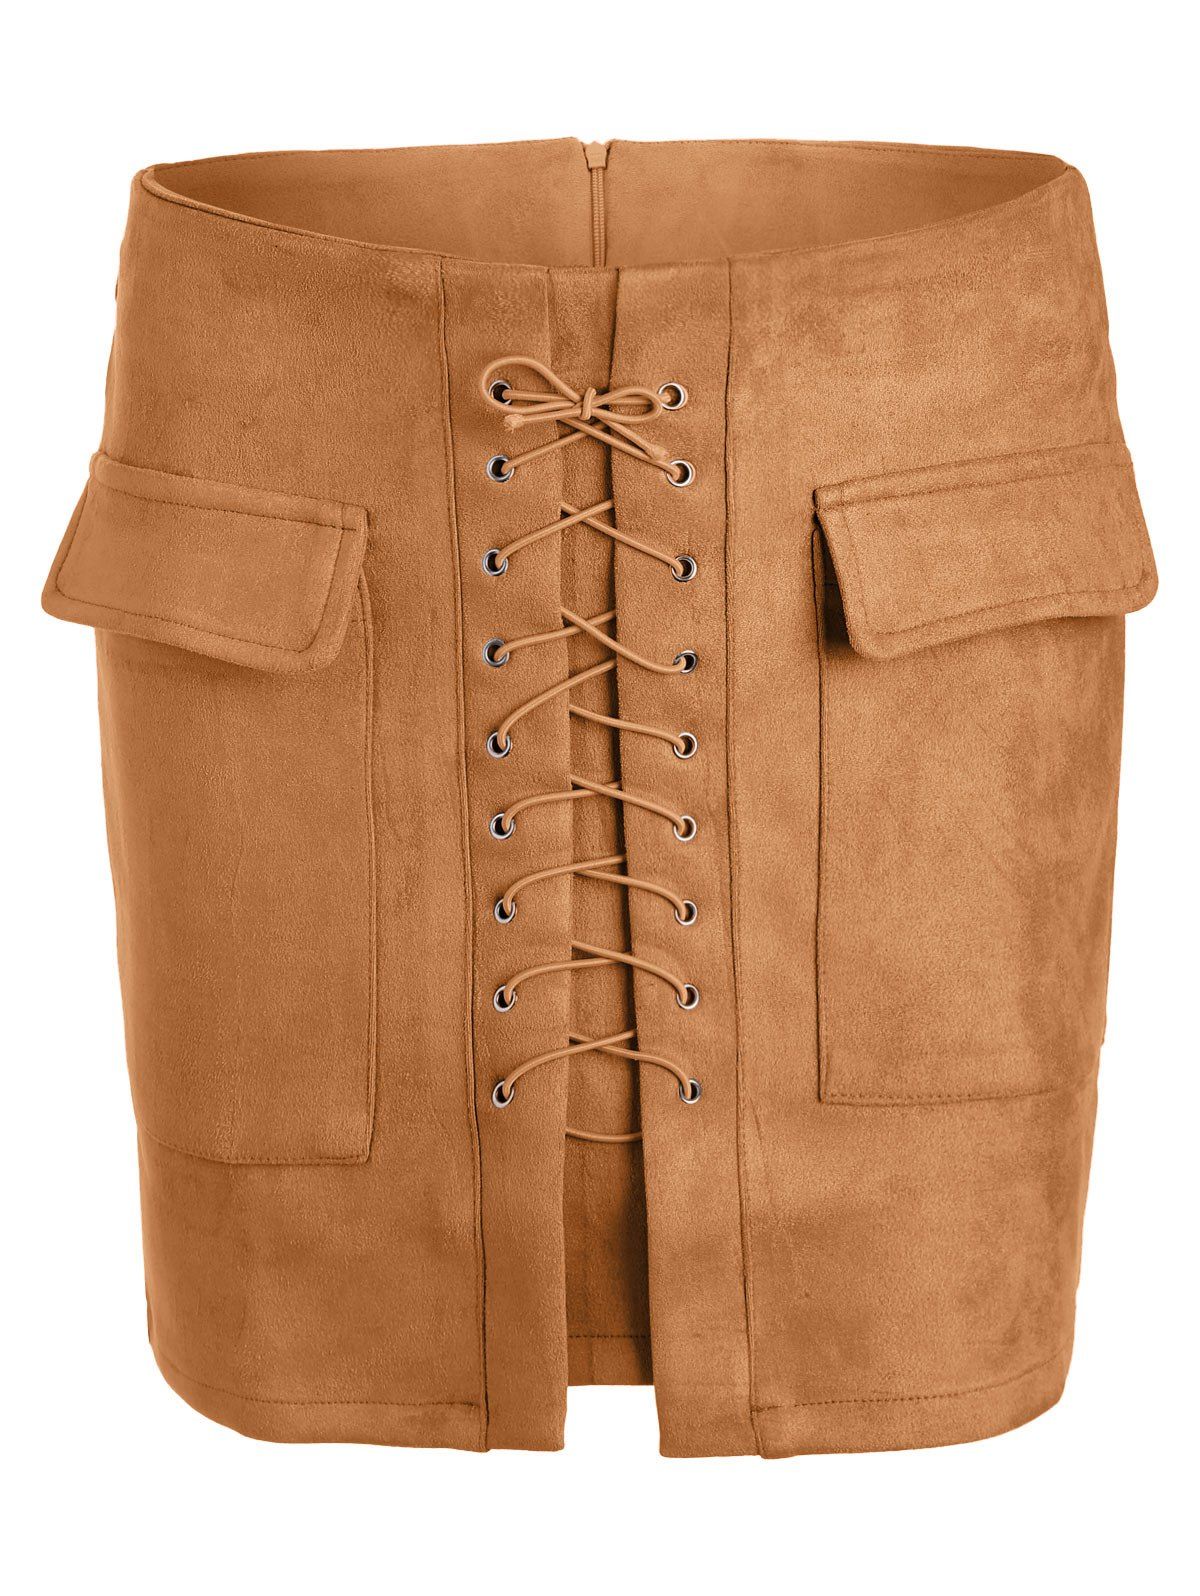 New Lace Up Pocket Suede Mini Bodycon Skirt  